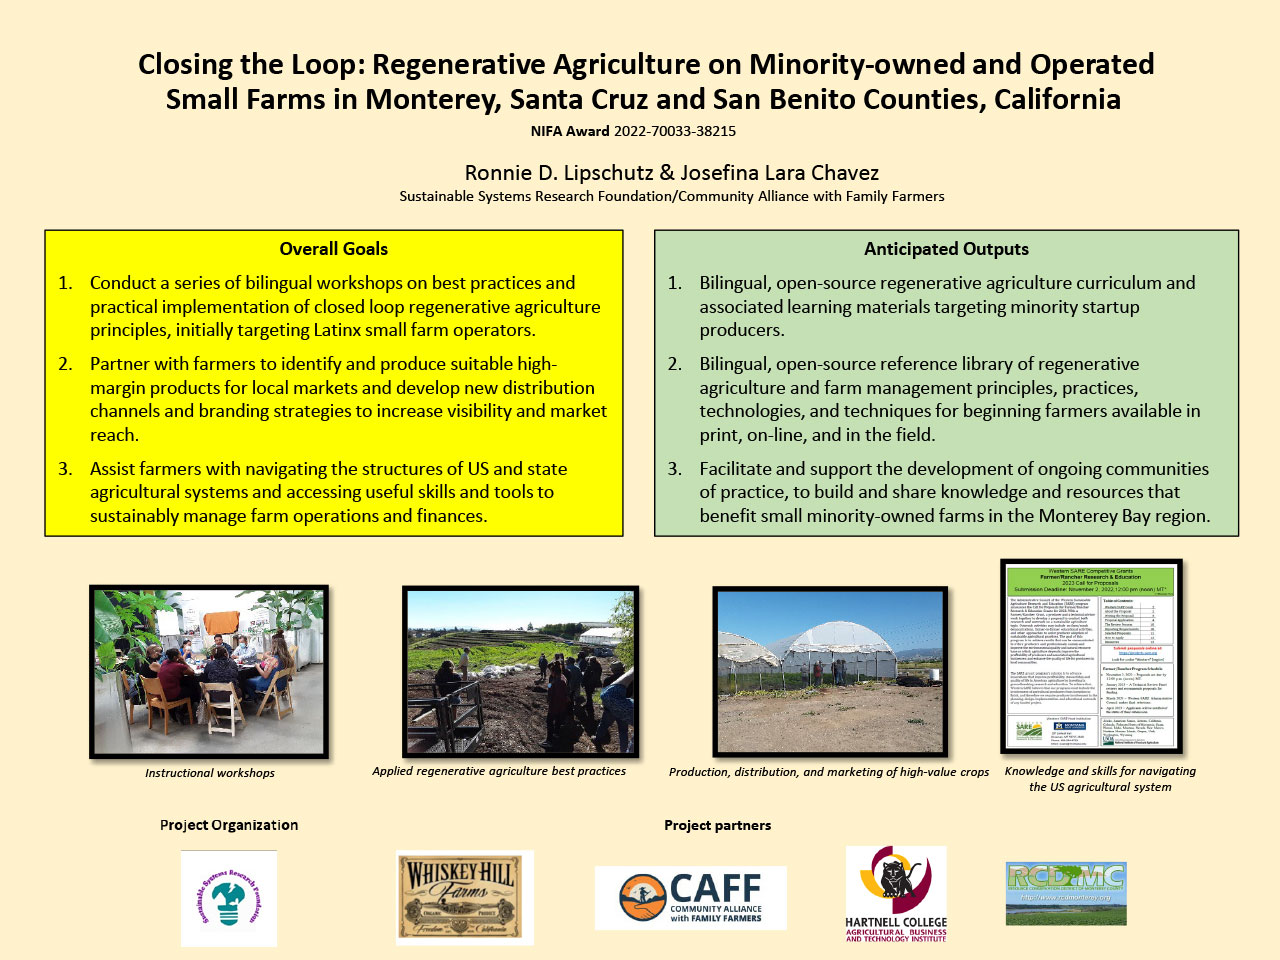 Closing the Loop: Regenerative Agriculture on Minority-owned and Operated Small Farms poster